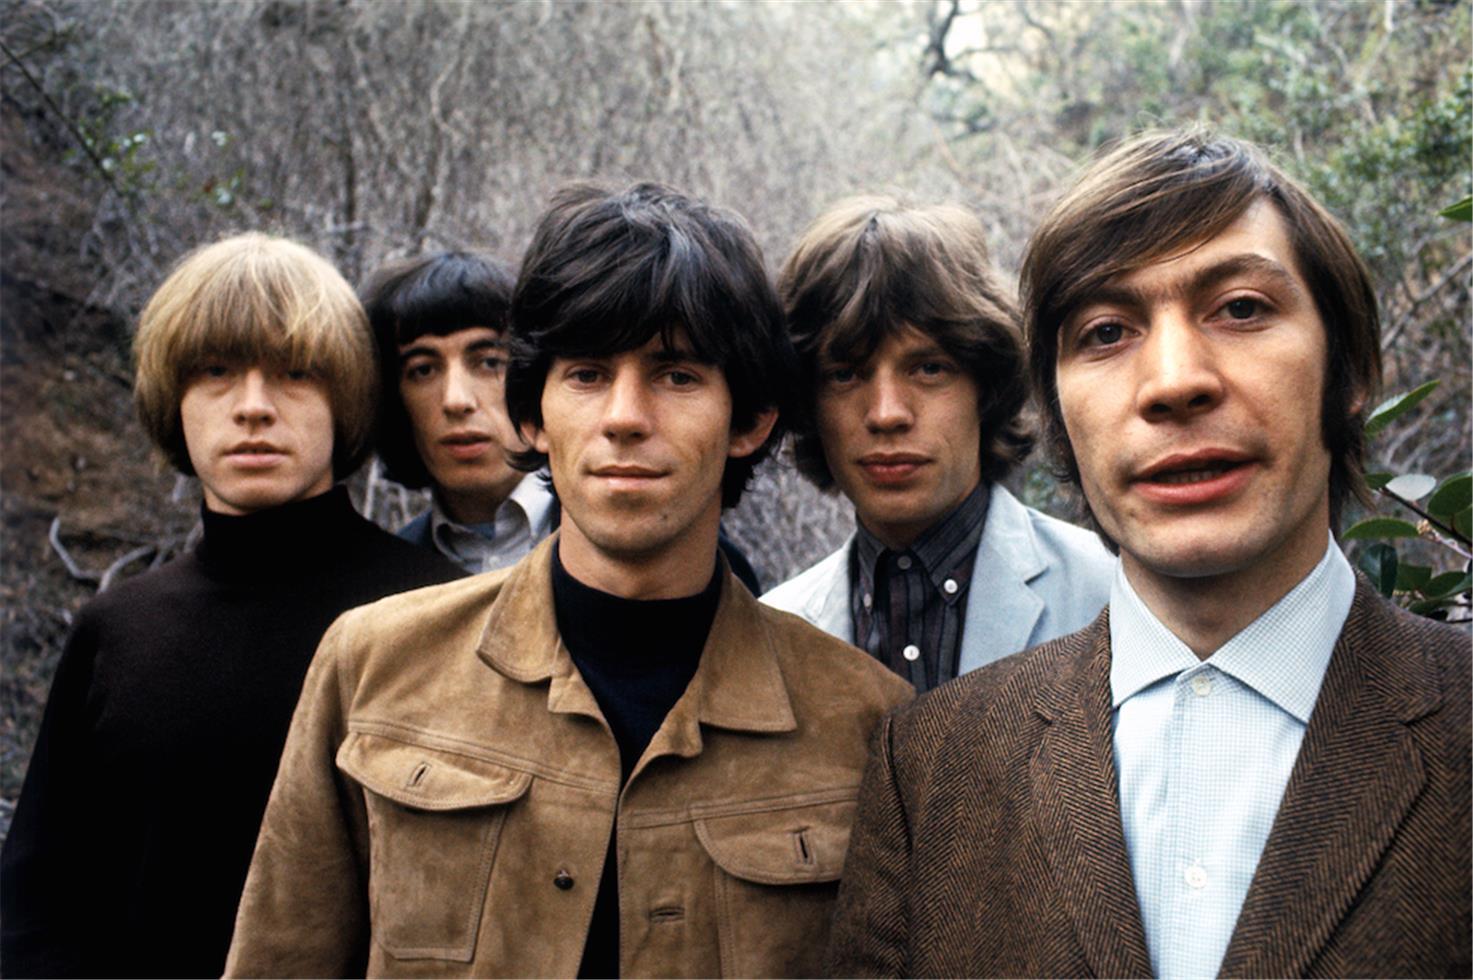 Guy Webster Color Photograph - The Rolling Stones, Group Portrait